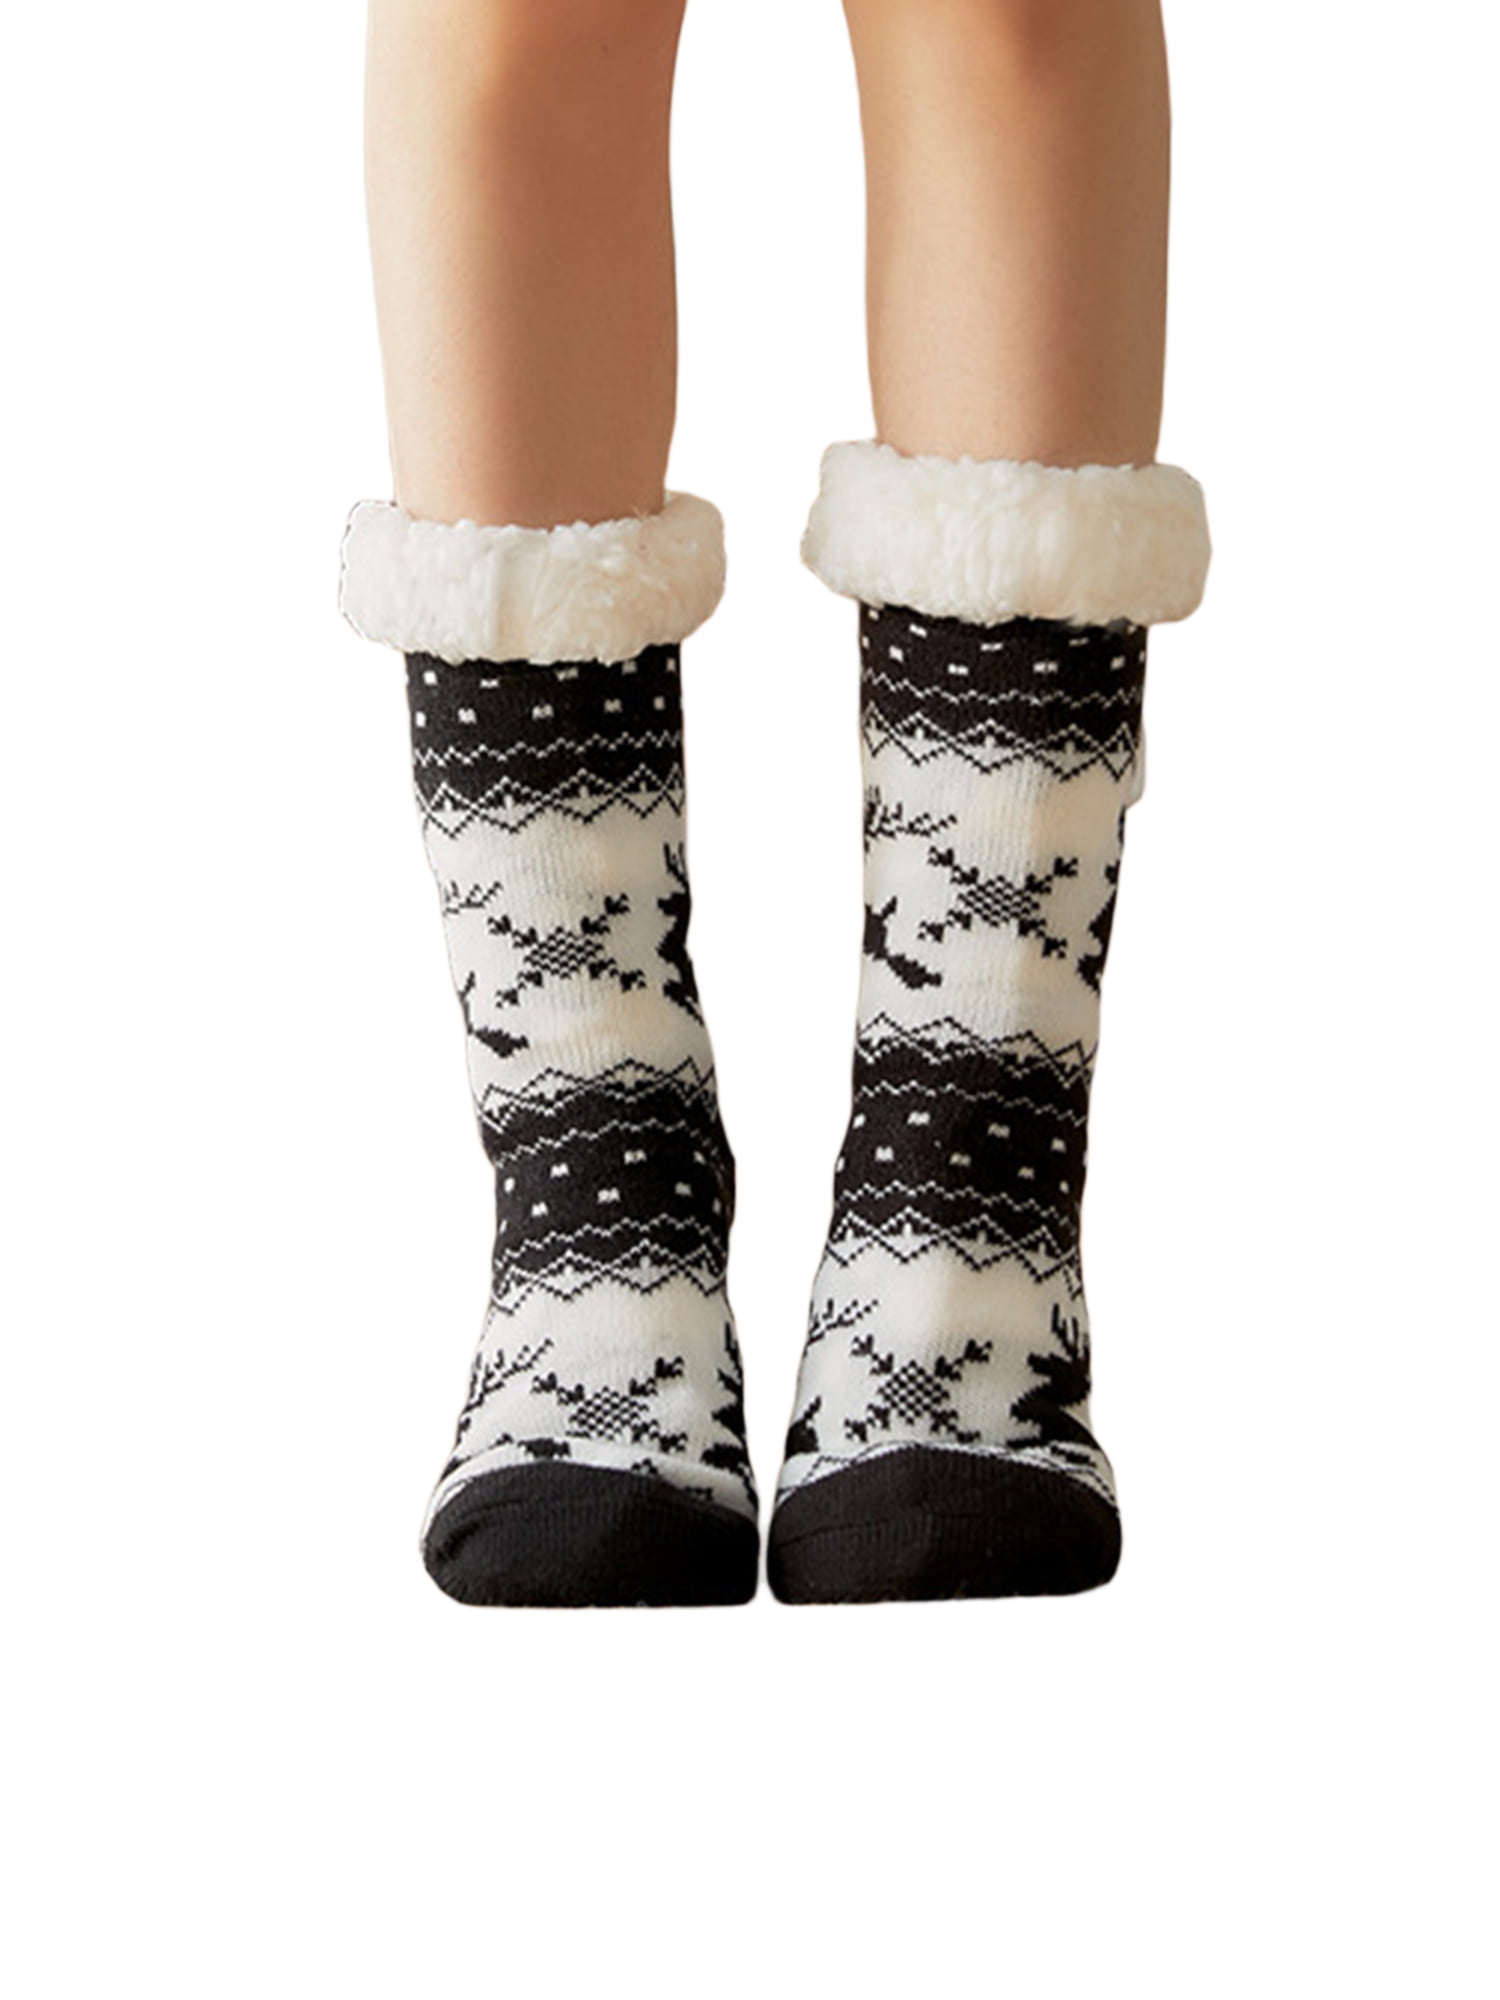 Women Socks Over Knee Christmas Cupcake Winter Warmth Unique For Holiday